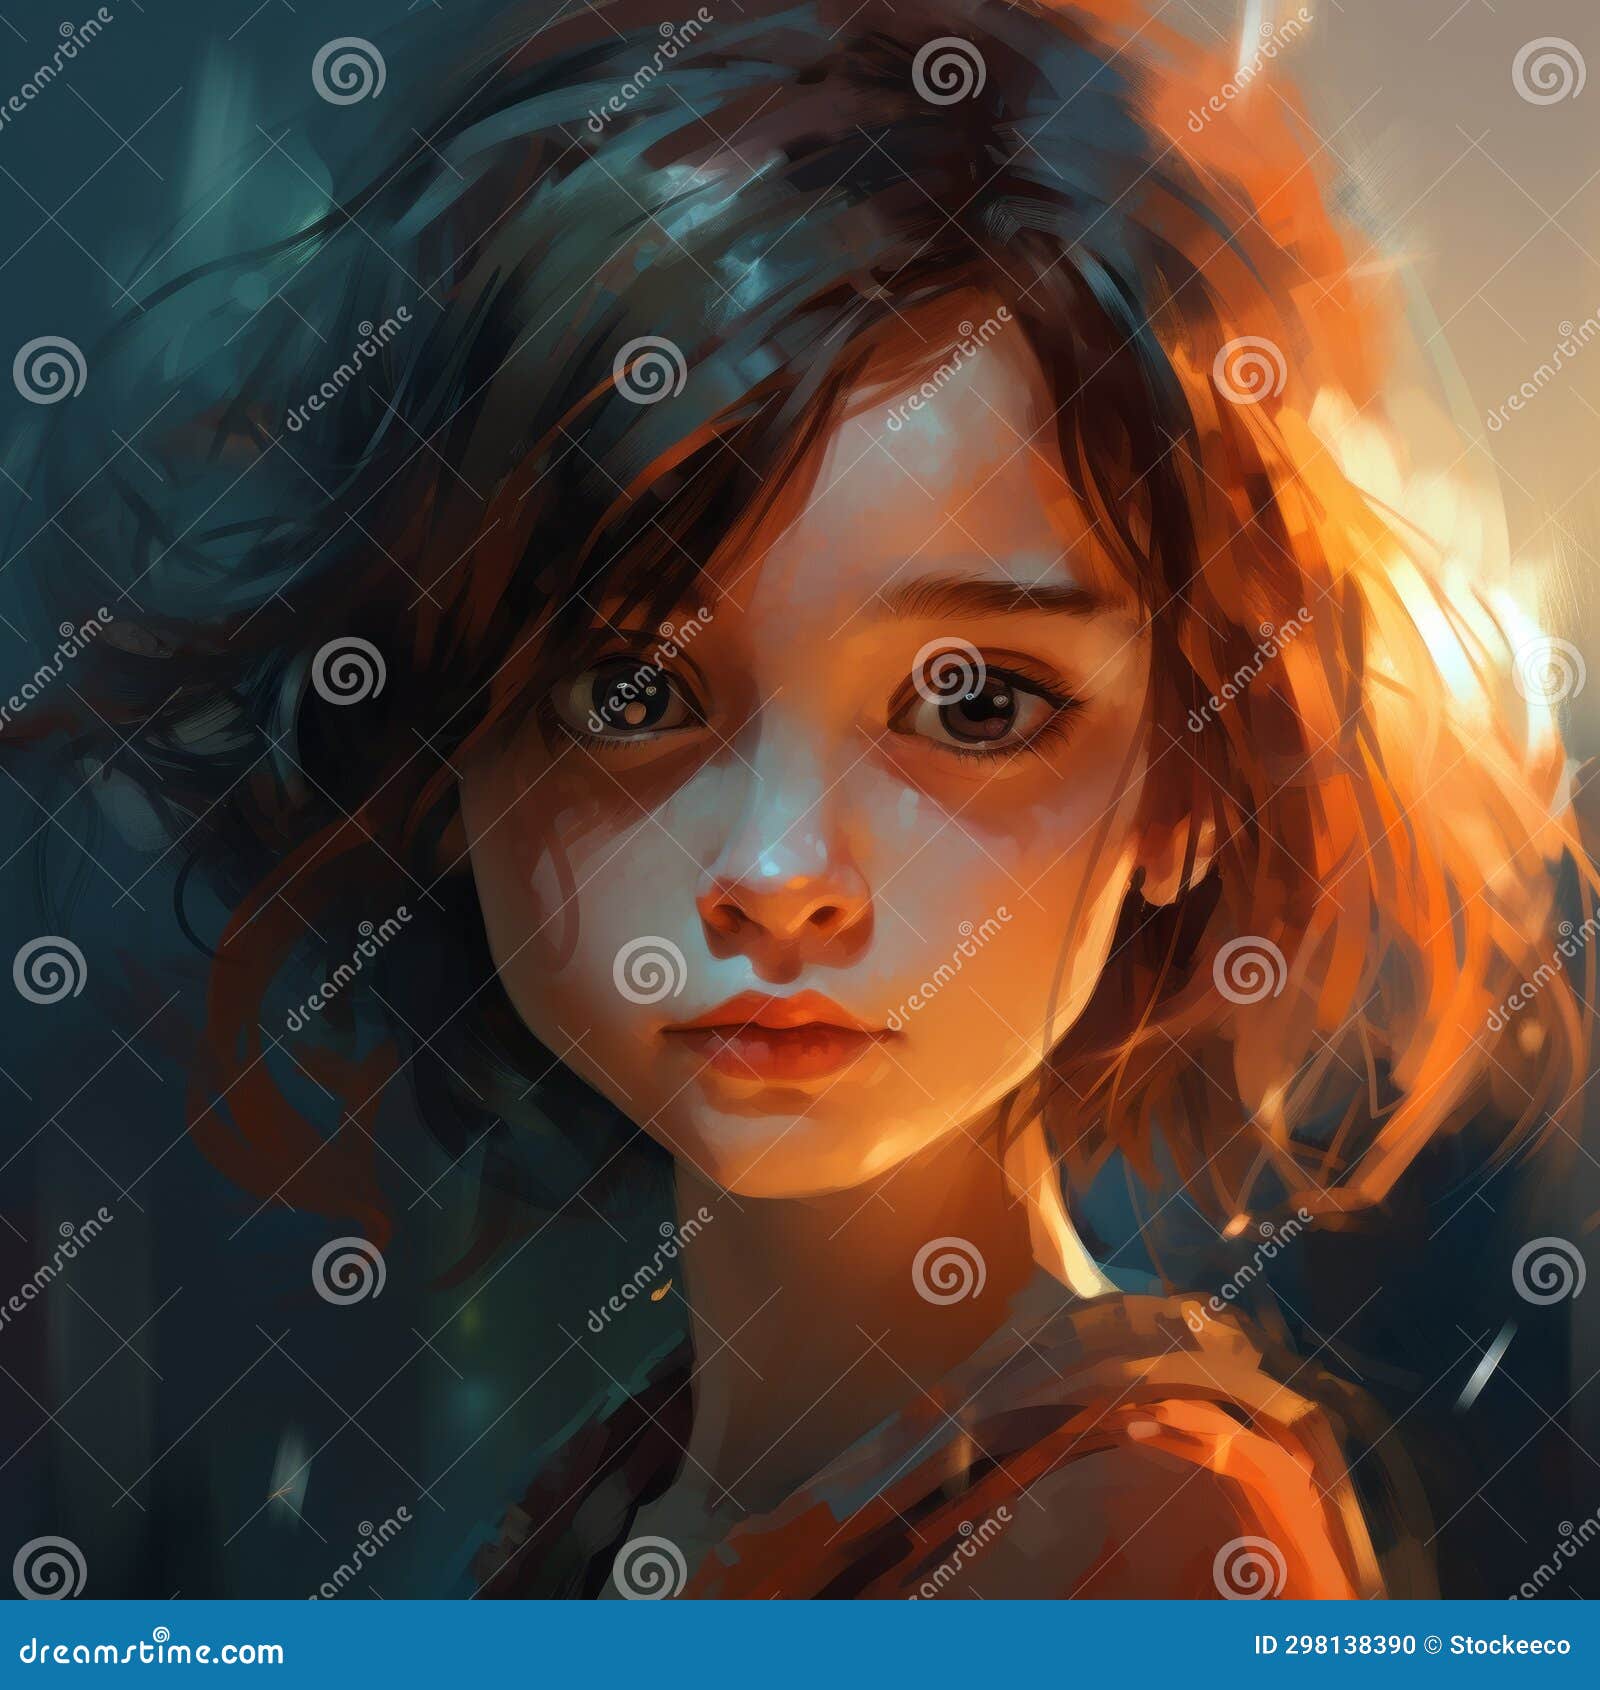 Glowing Colors: a Stunning Illustration of a Girl with Mesmerizing Hair ...